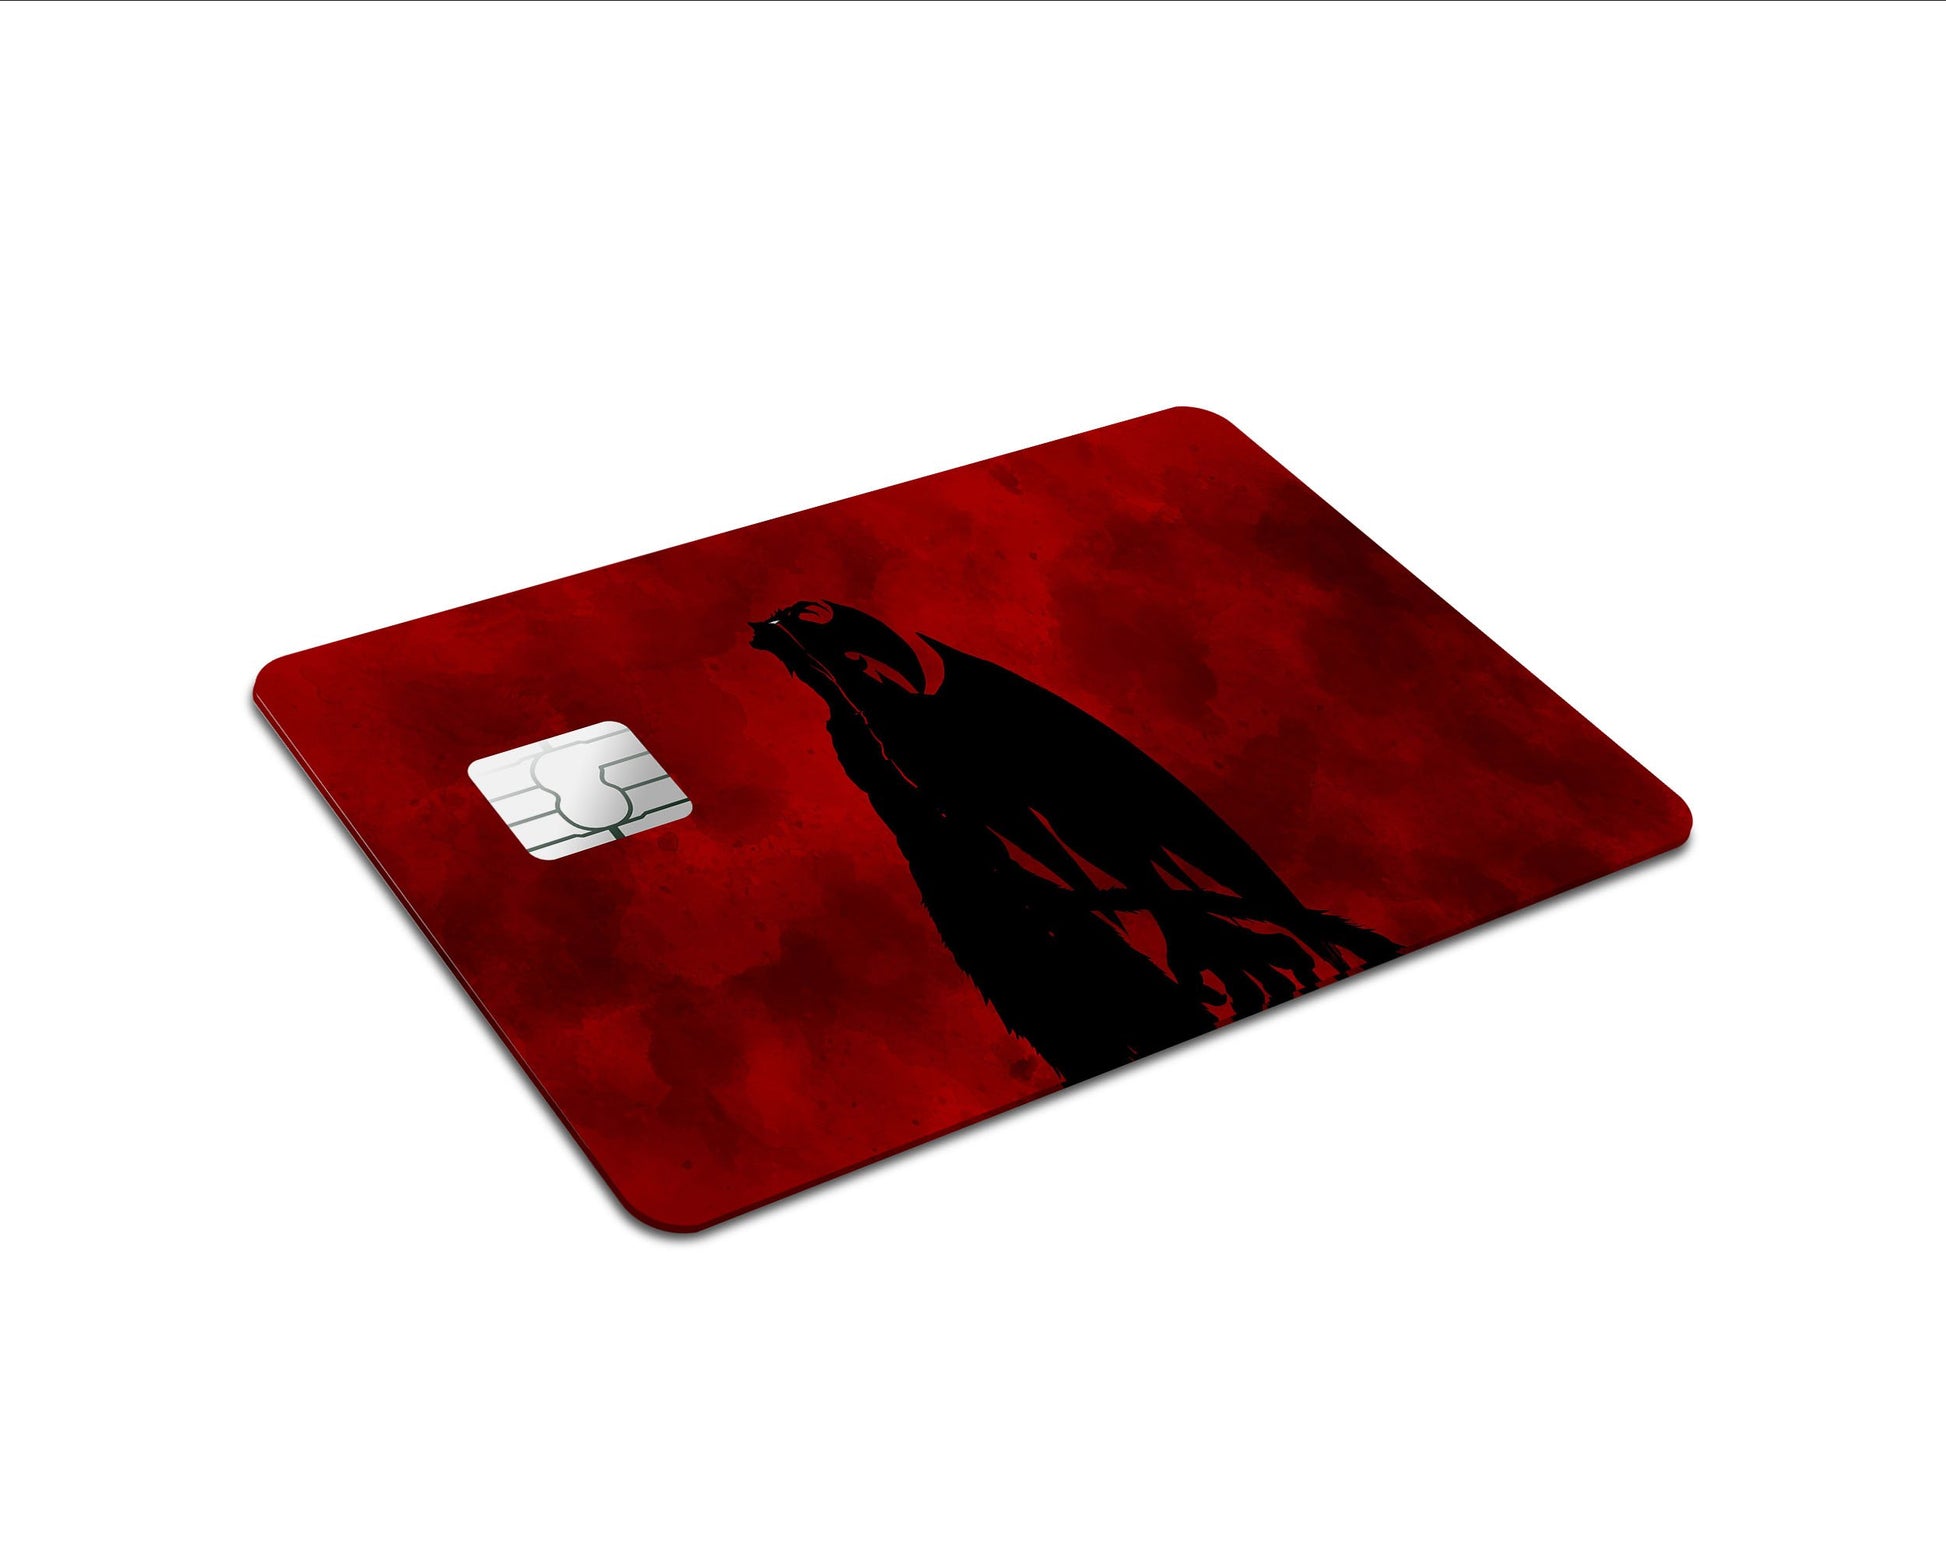 Anime Town Creations Credit Card Devilman Crybaby Red Full Skins - Anime Devilman Crybaby Skin